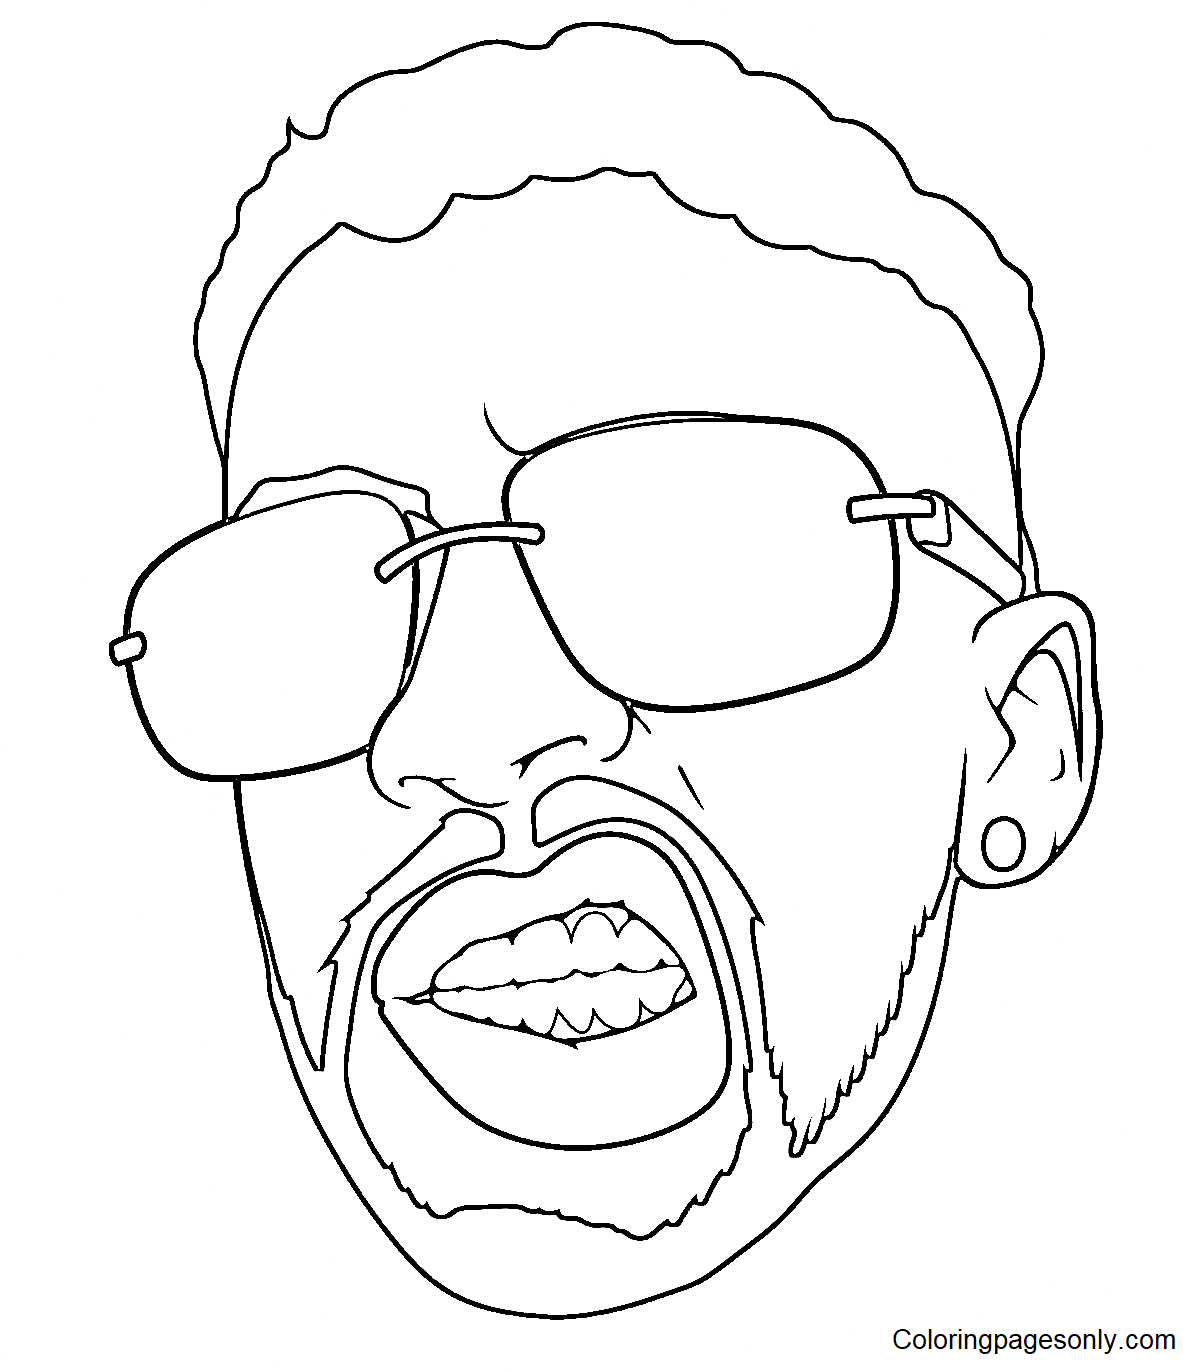 Bad Bunny With Sunglasses Coloring Pages